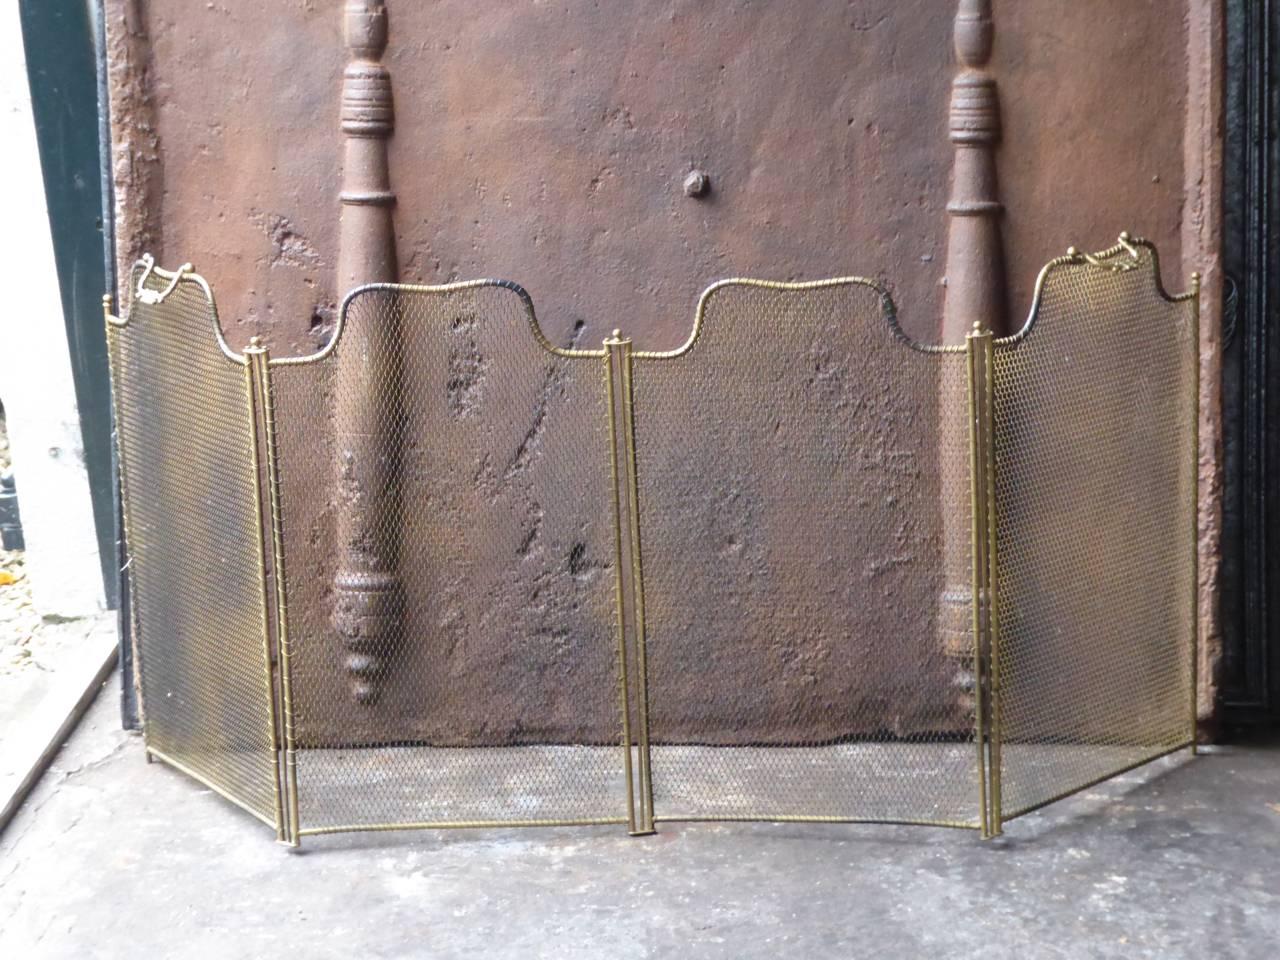 19th century, French fireplace screen made of iron and iron mesh.

We have a unique and specialized collection of antique and used fireplace accessories consisting of more than 1000 listings at 1stdibs. Amongst others, we always have 300+ firebacks,